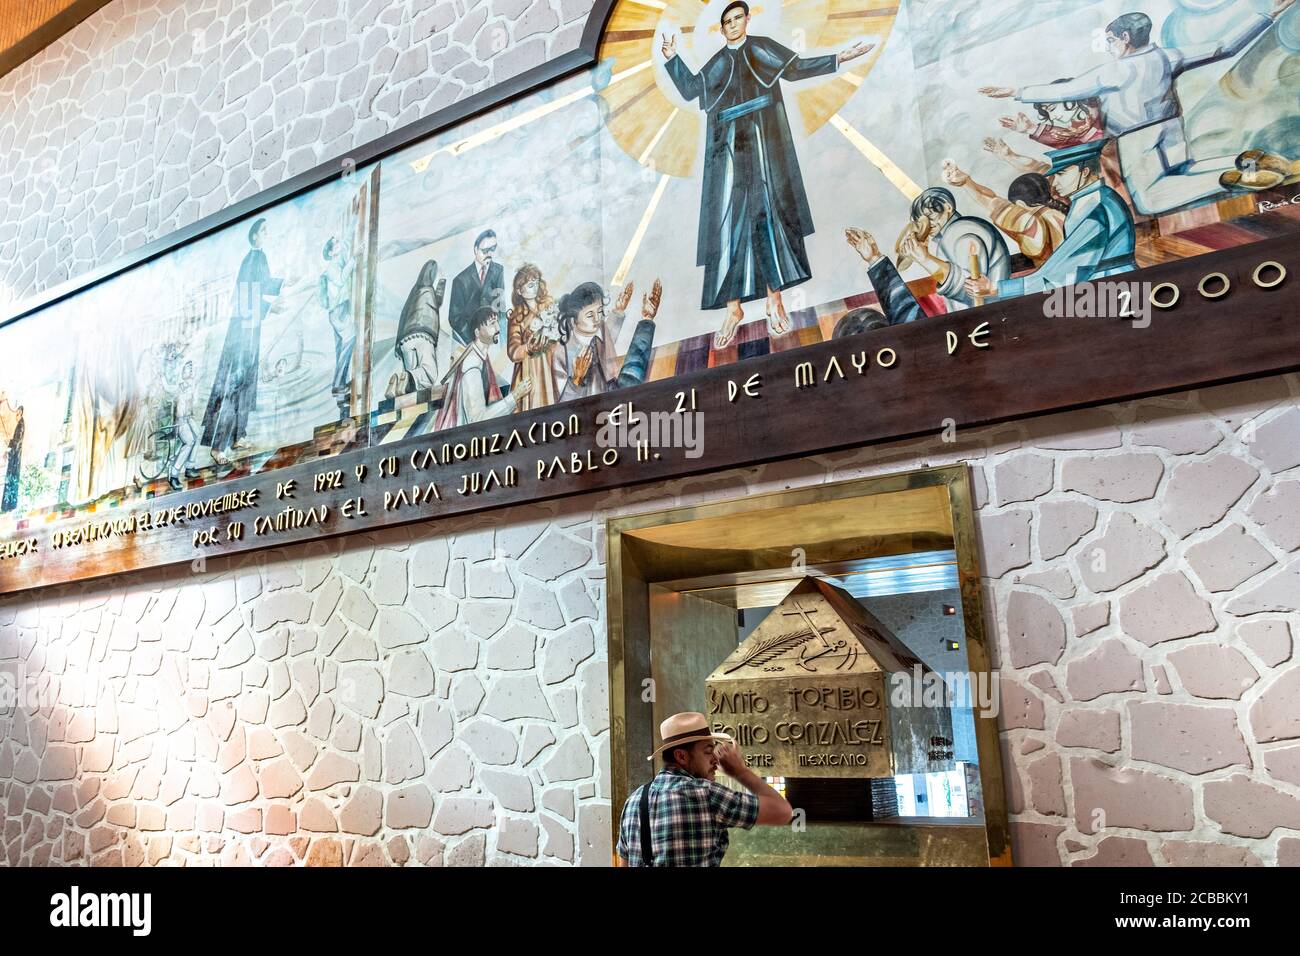 A pilgrim views the remains of Saint Toribio Romo in the Sanctuary of Santa Ana de Guadalupe, Jalisco State, Mexico. Father Toribio was a Mexican Catholic priest and martyr who was killed during the anti-clerical persecutions of the Cristero War. Stock Photo